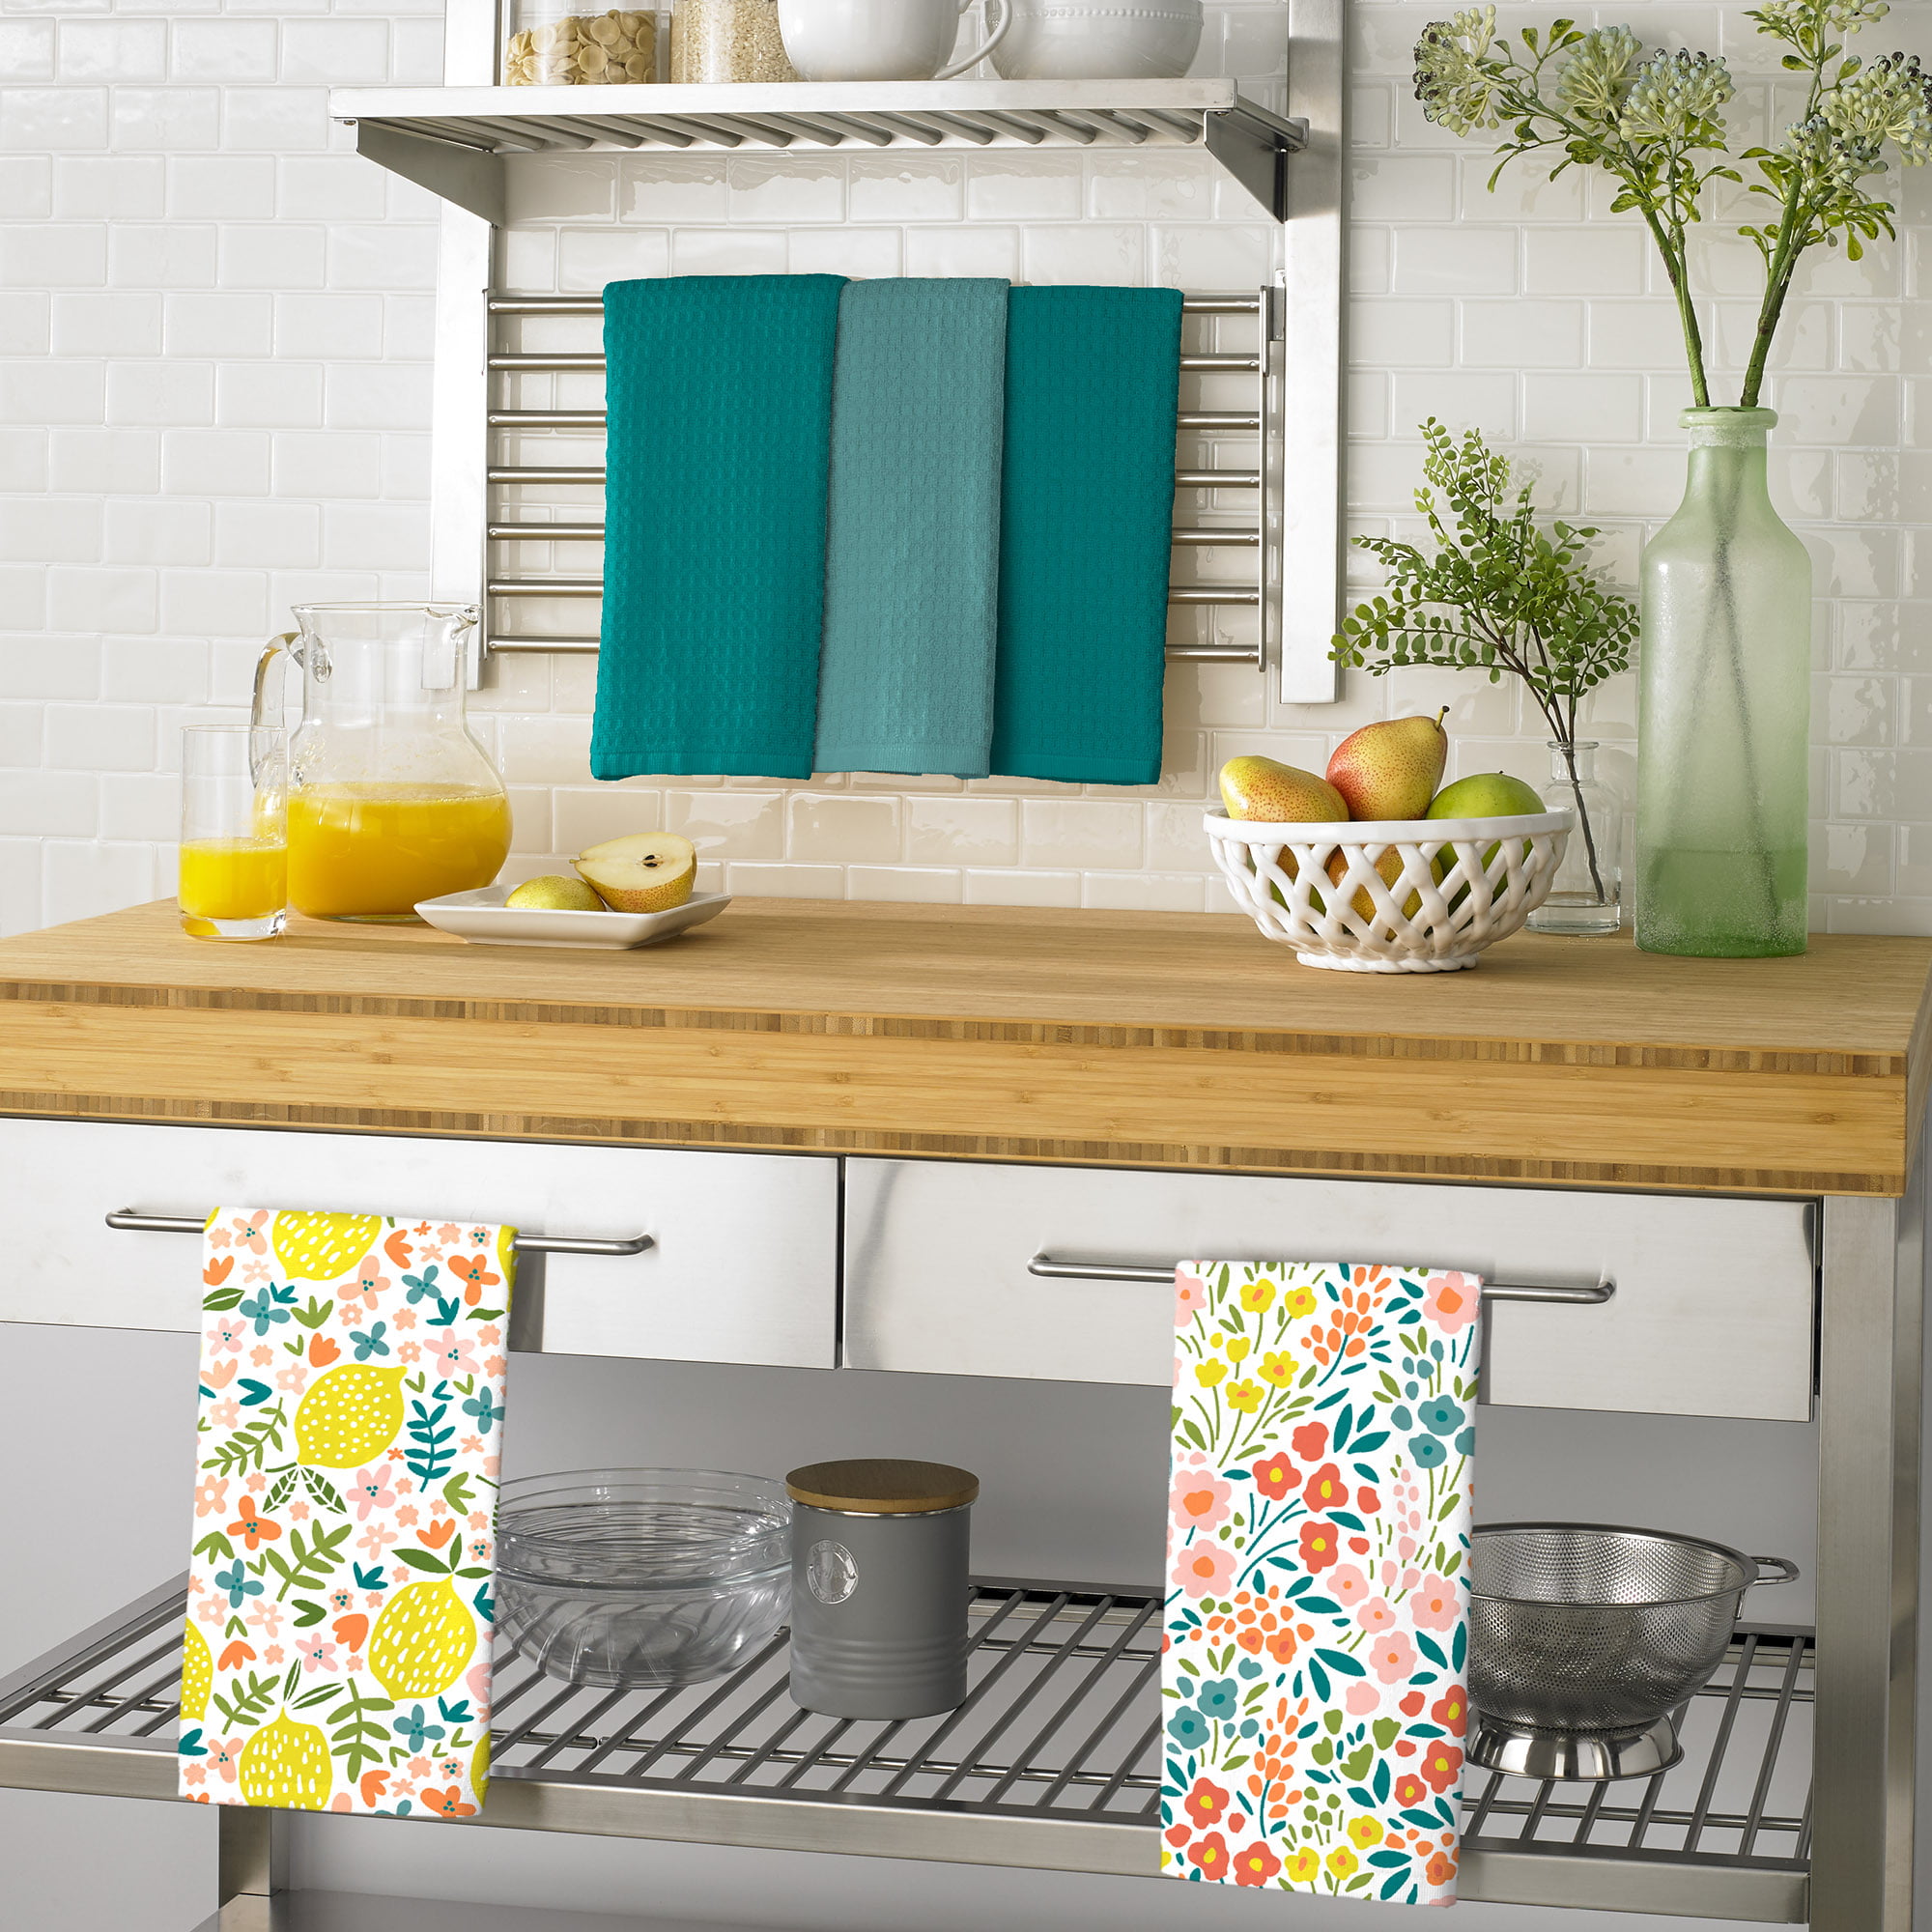 Mainstays Ogee Tile Kitchen Towel, Pot Holder, and Oven Mitt Set,  Multicolor, 15W x 25L, 5 Pieces 